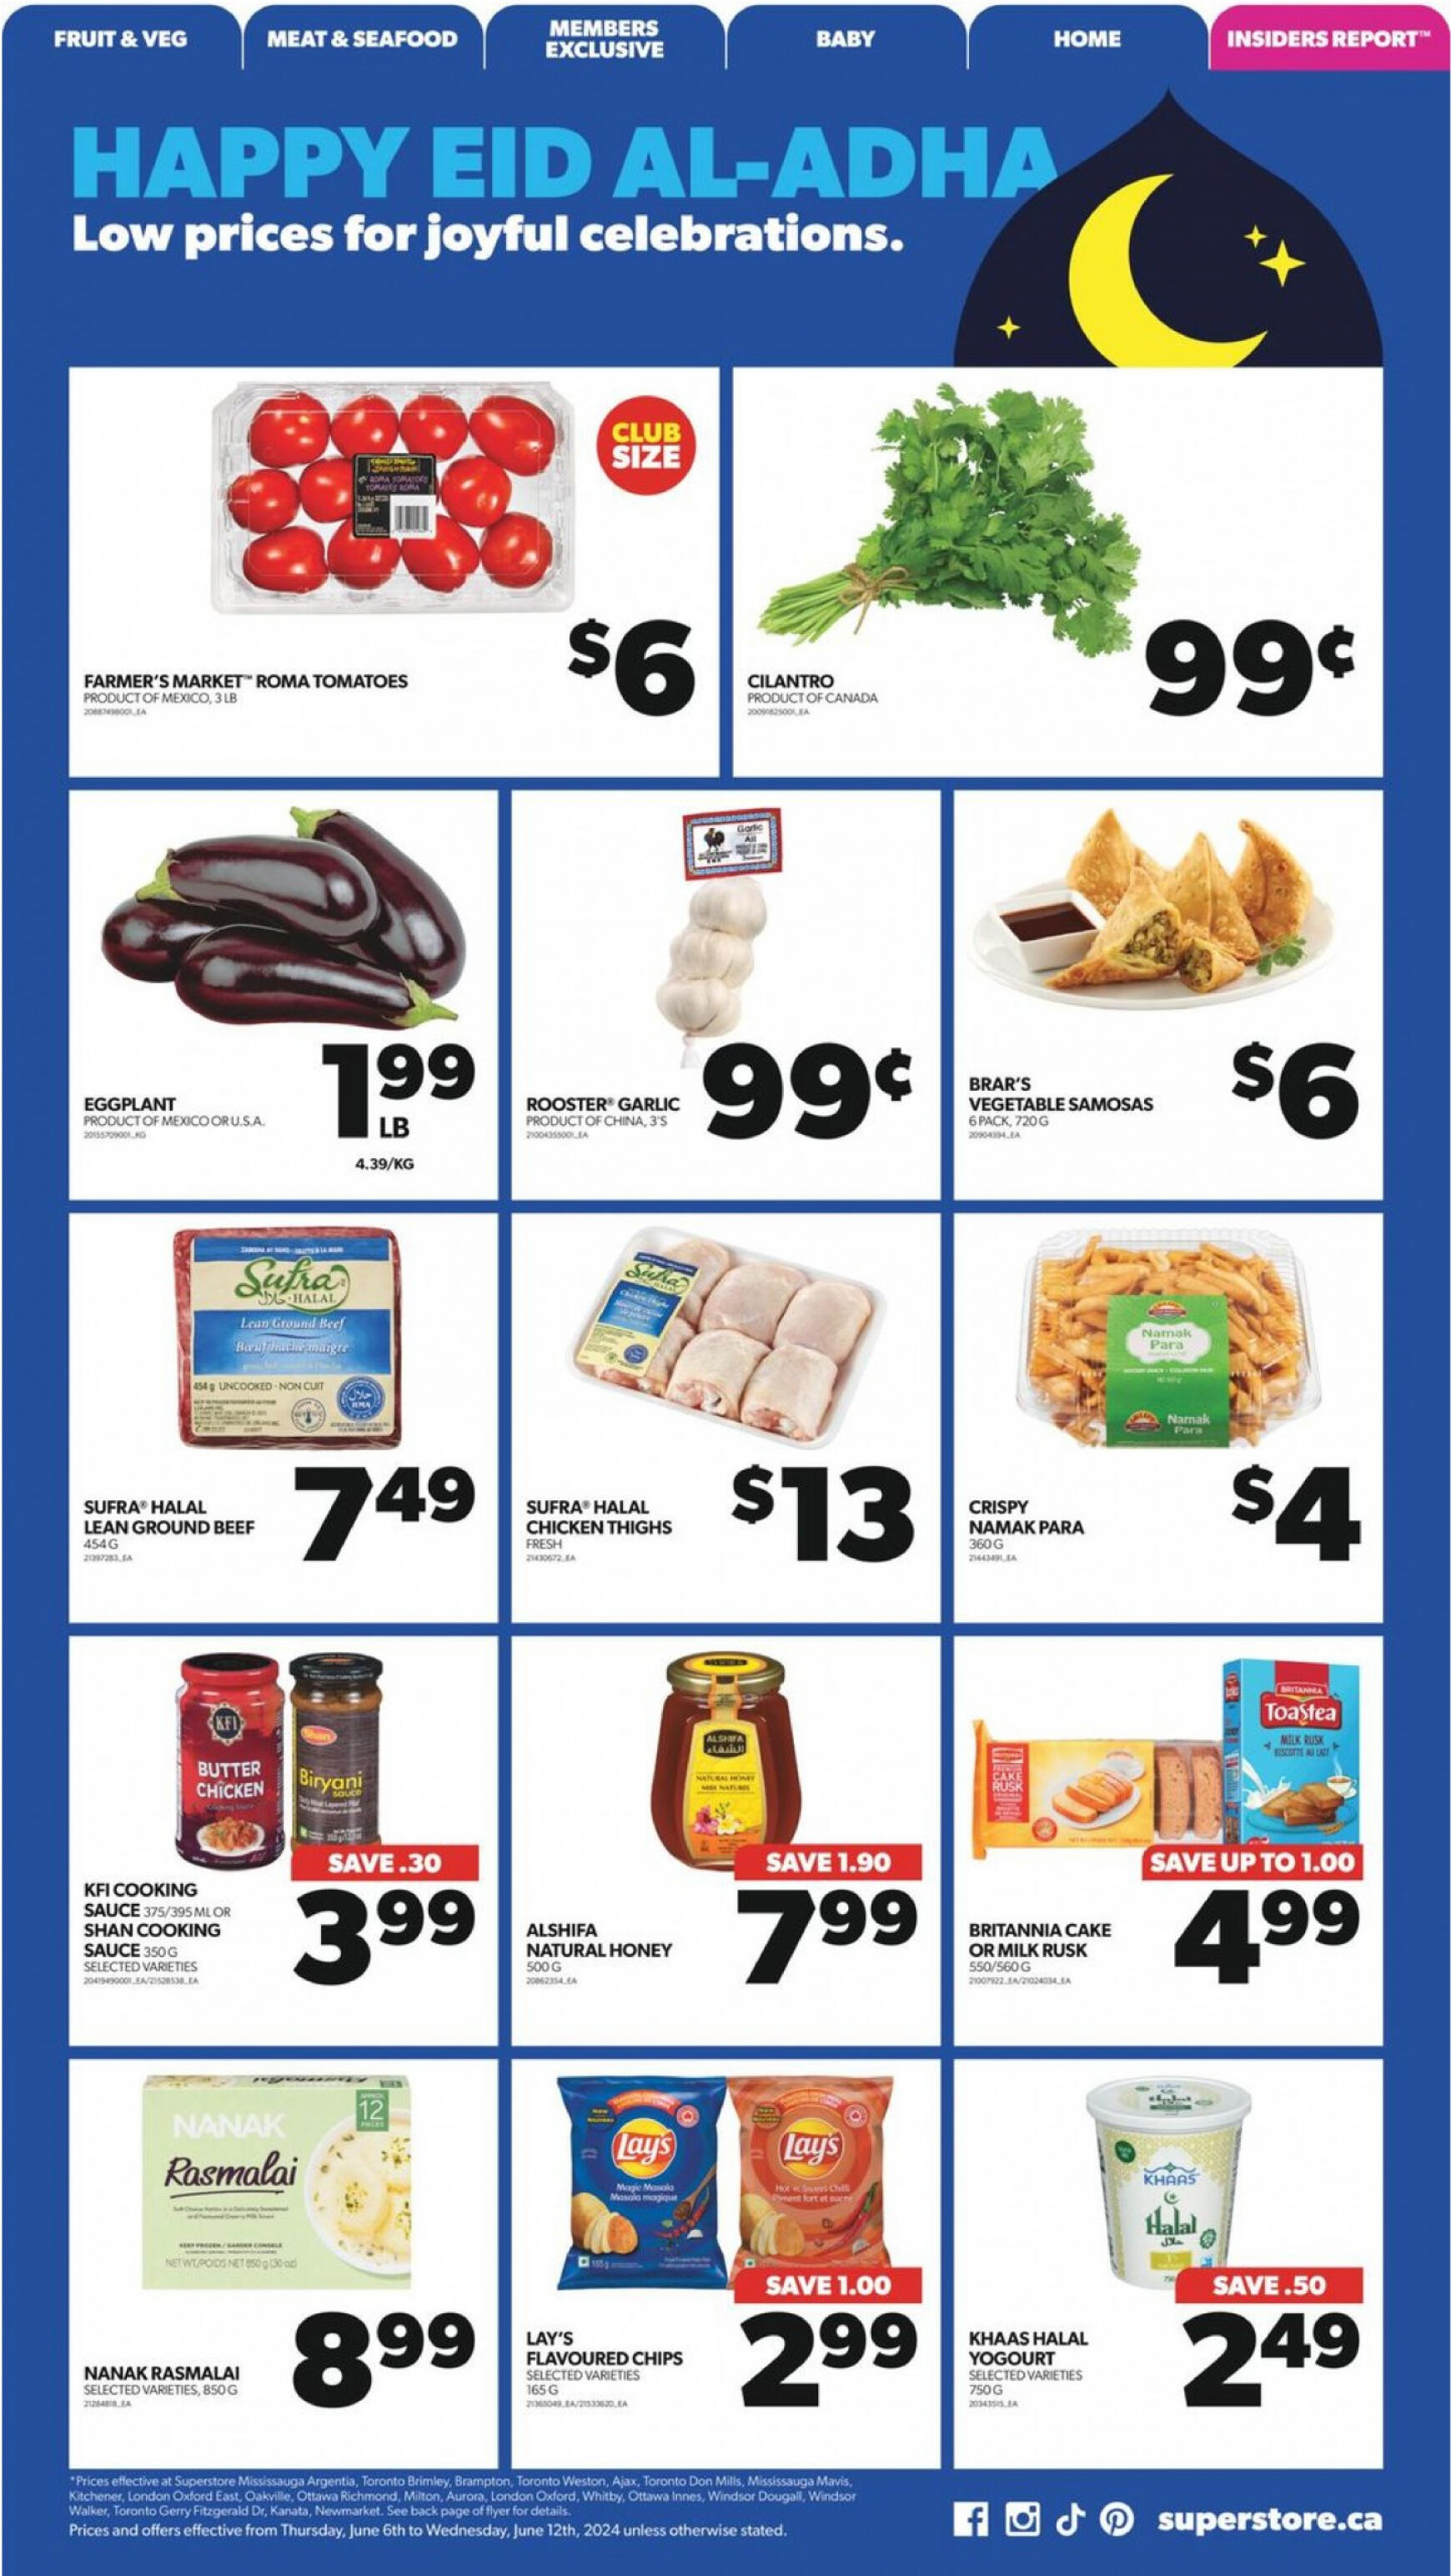 real-canadian-superstore - Real Canadian Superstore flyer current 06.06. - 12.06. - page: 28